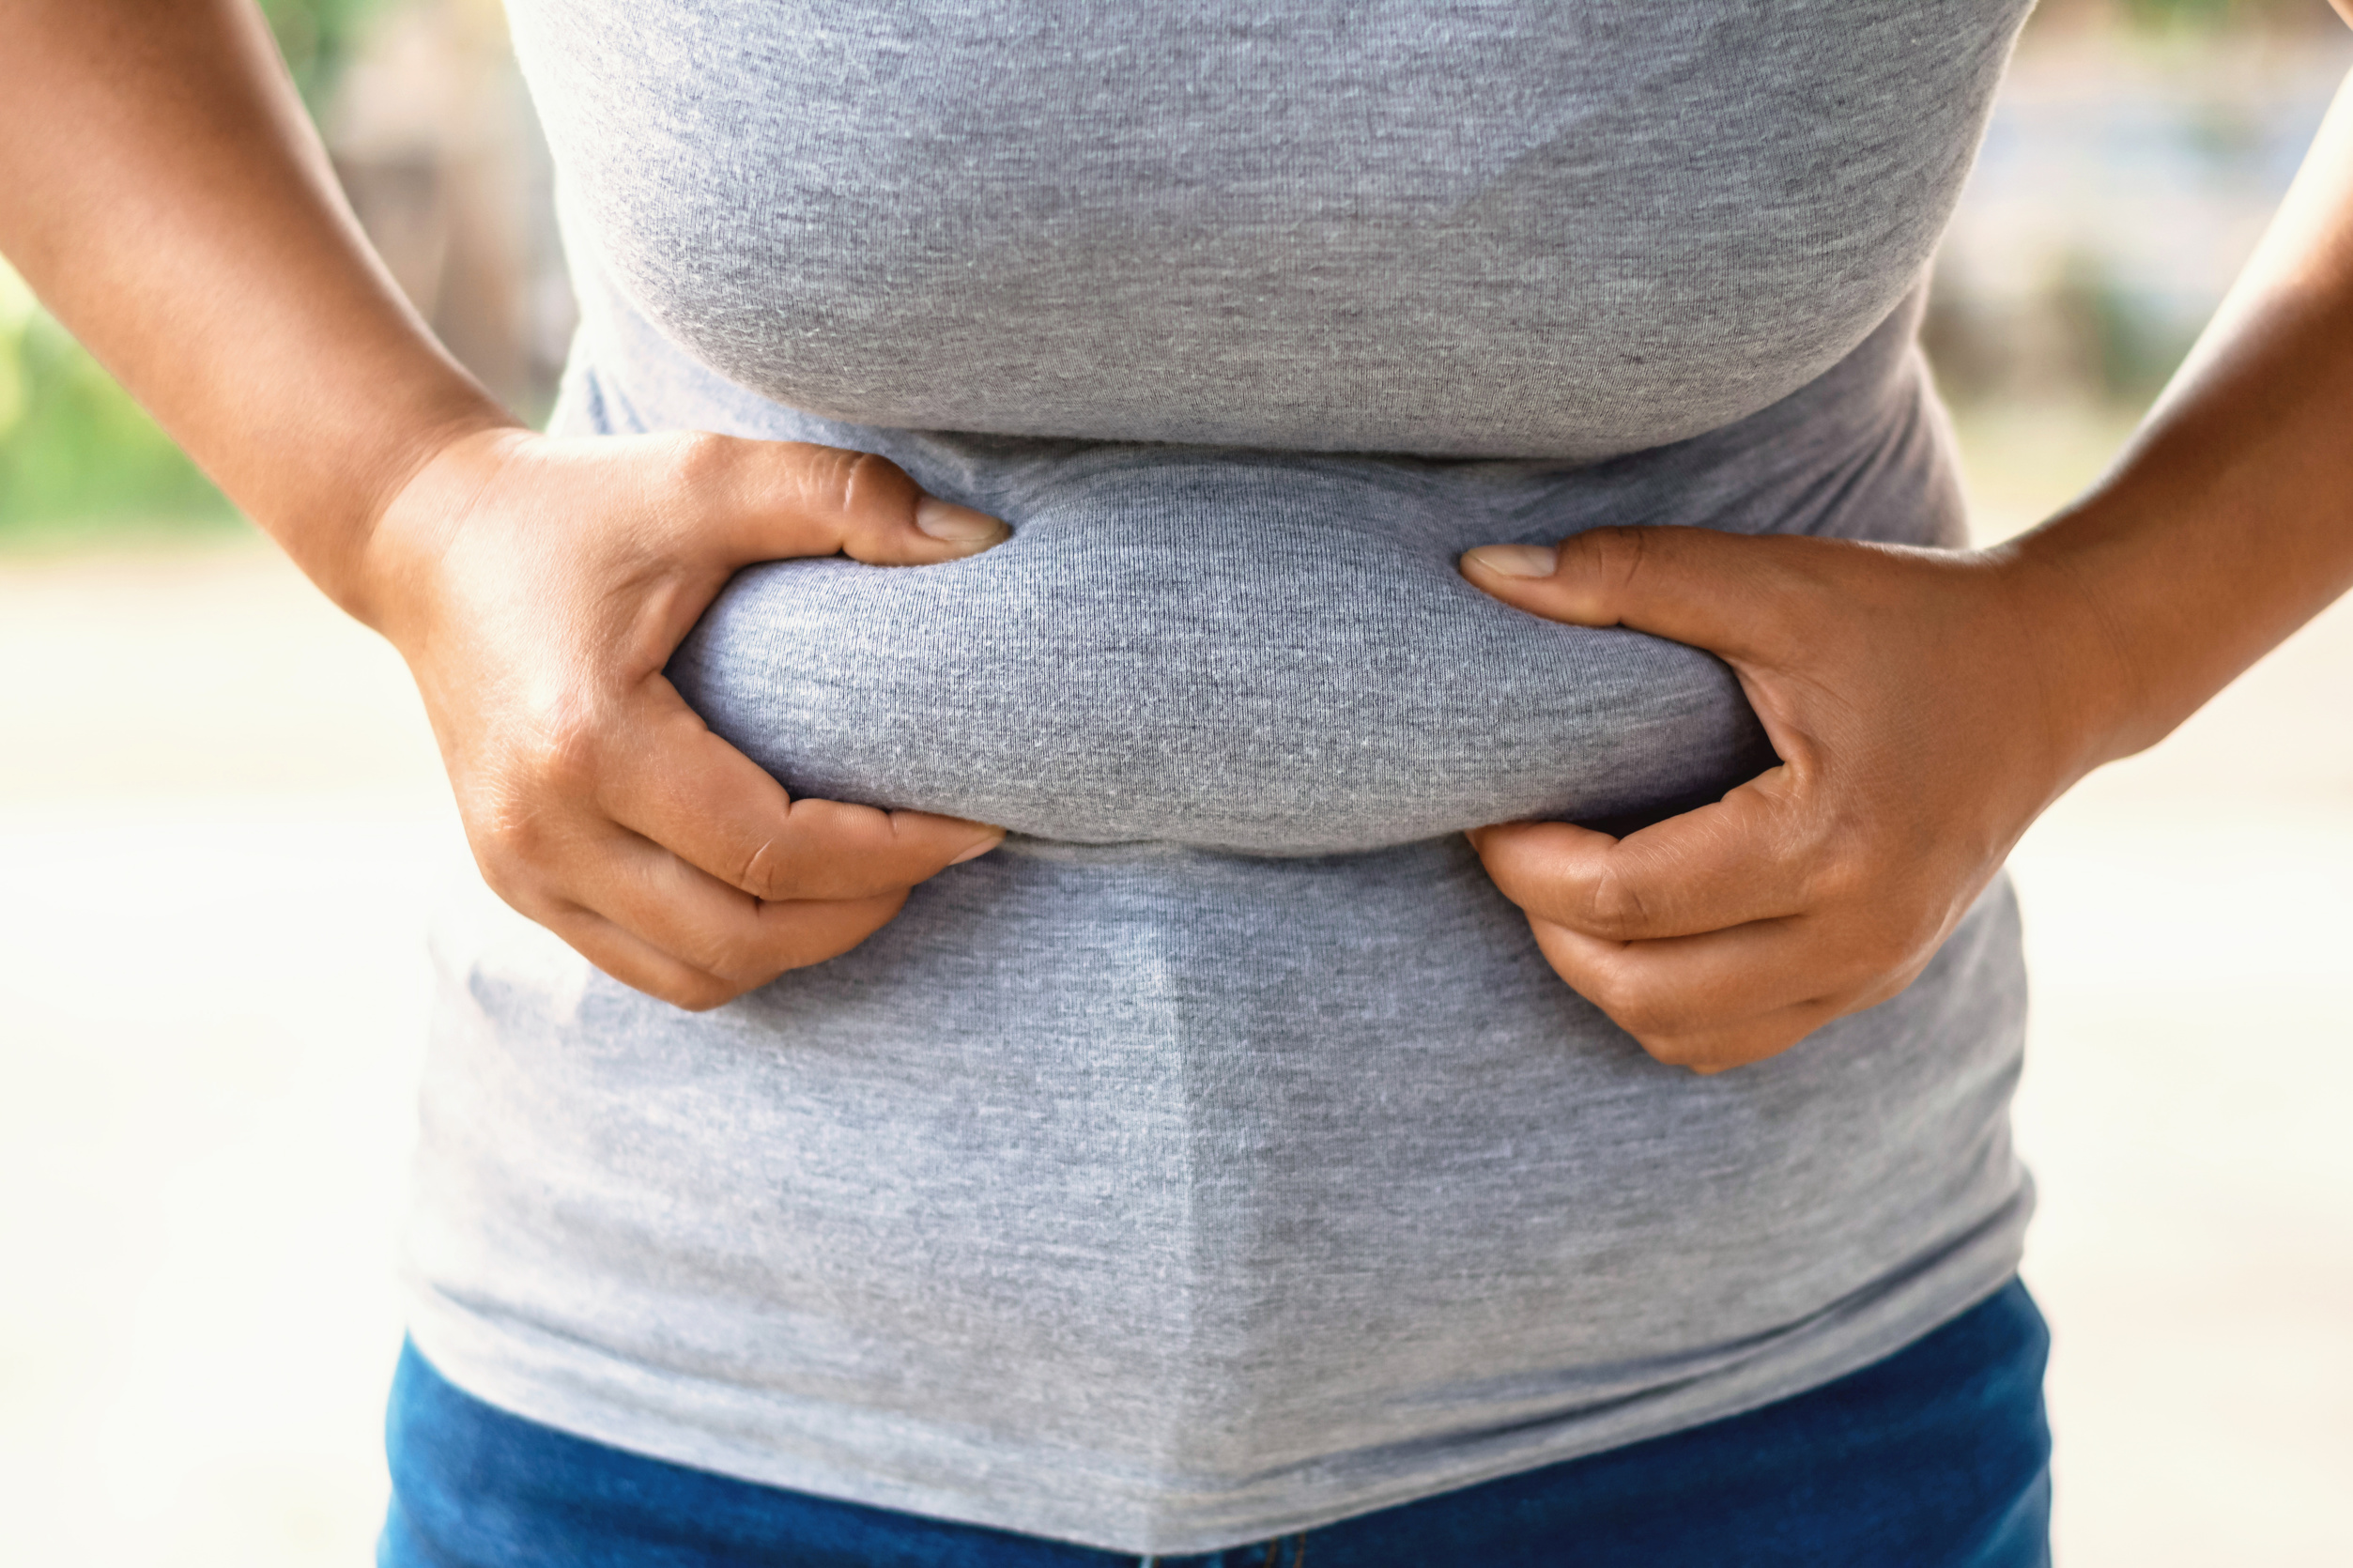 Belly fat linked to early death